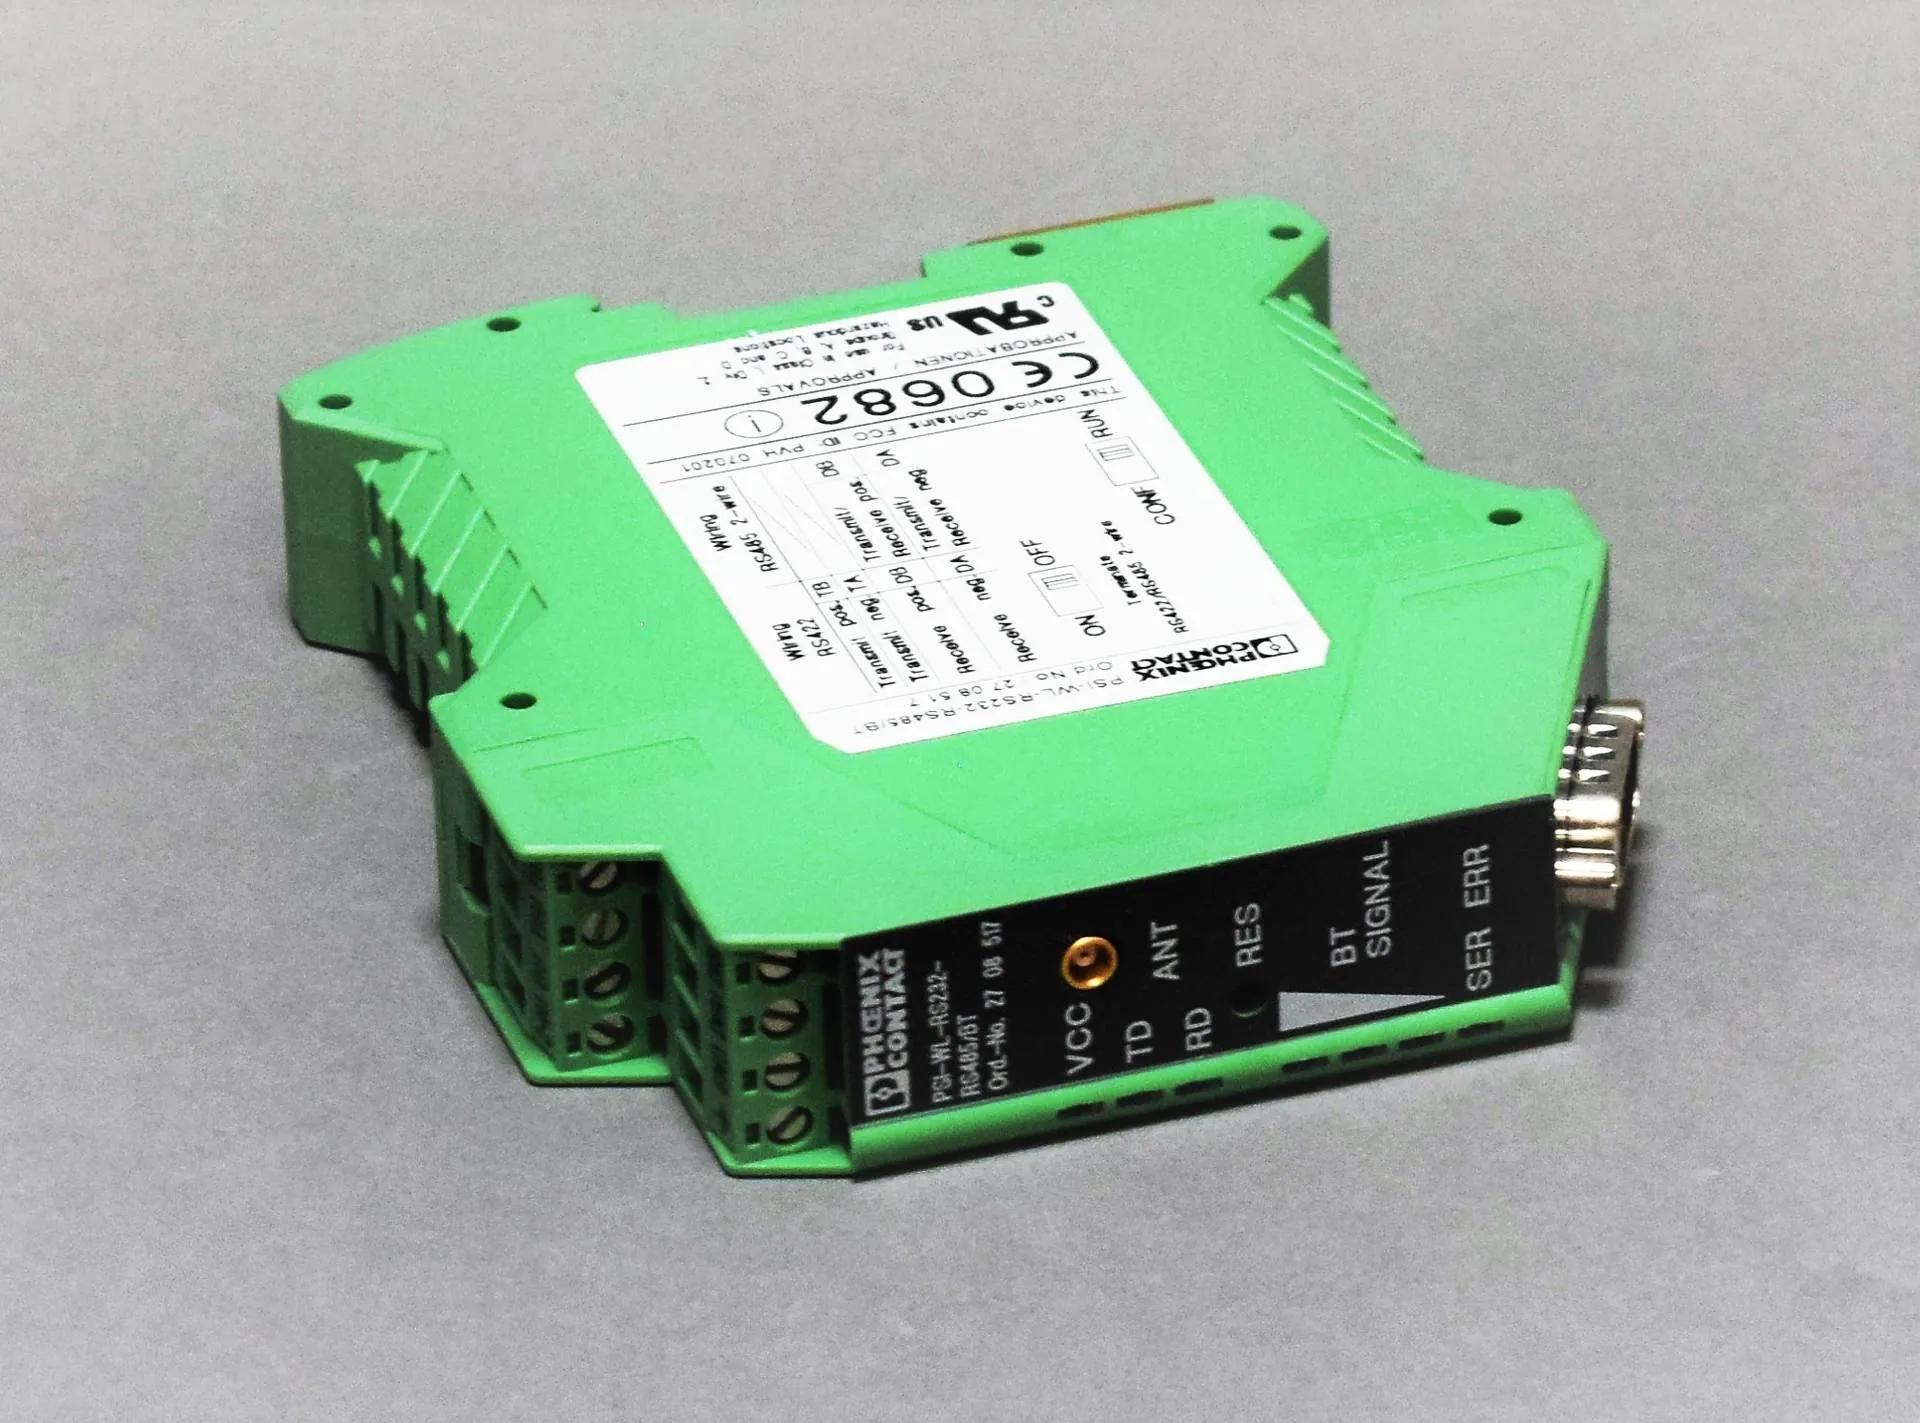 PSI-WL-RS232-RS485/BT